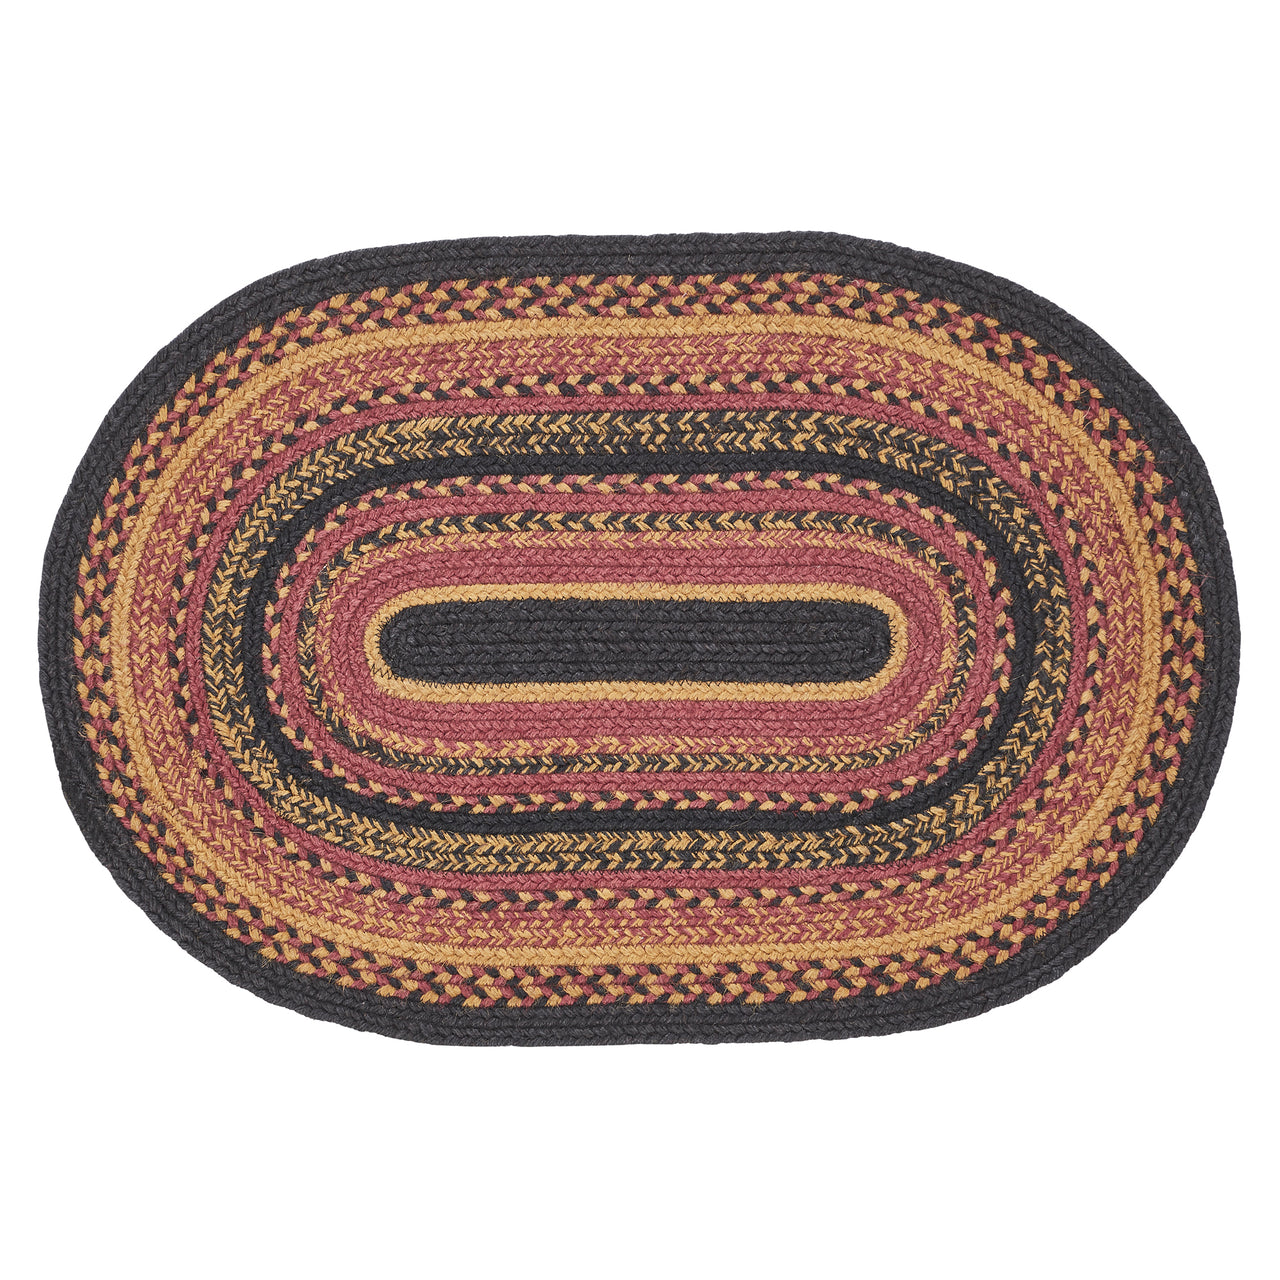 Heritage Farms Jute Braided Rug Oval with Rug Pad 20"x30" VHC Brands